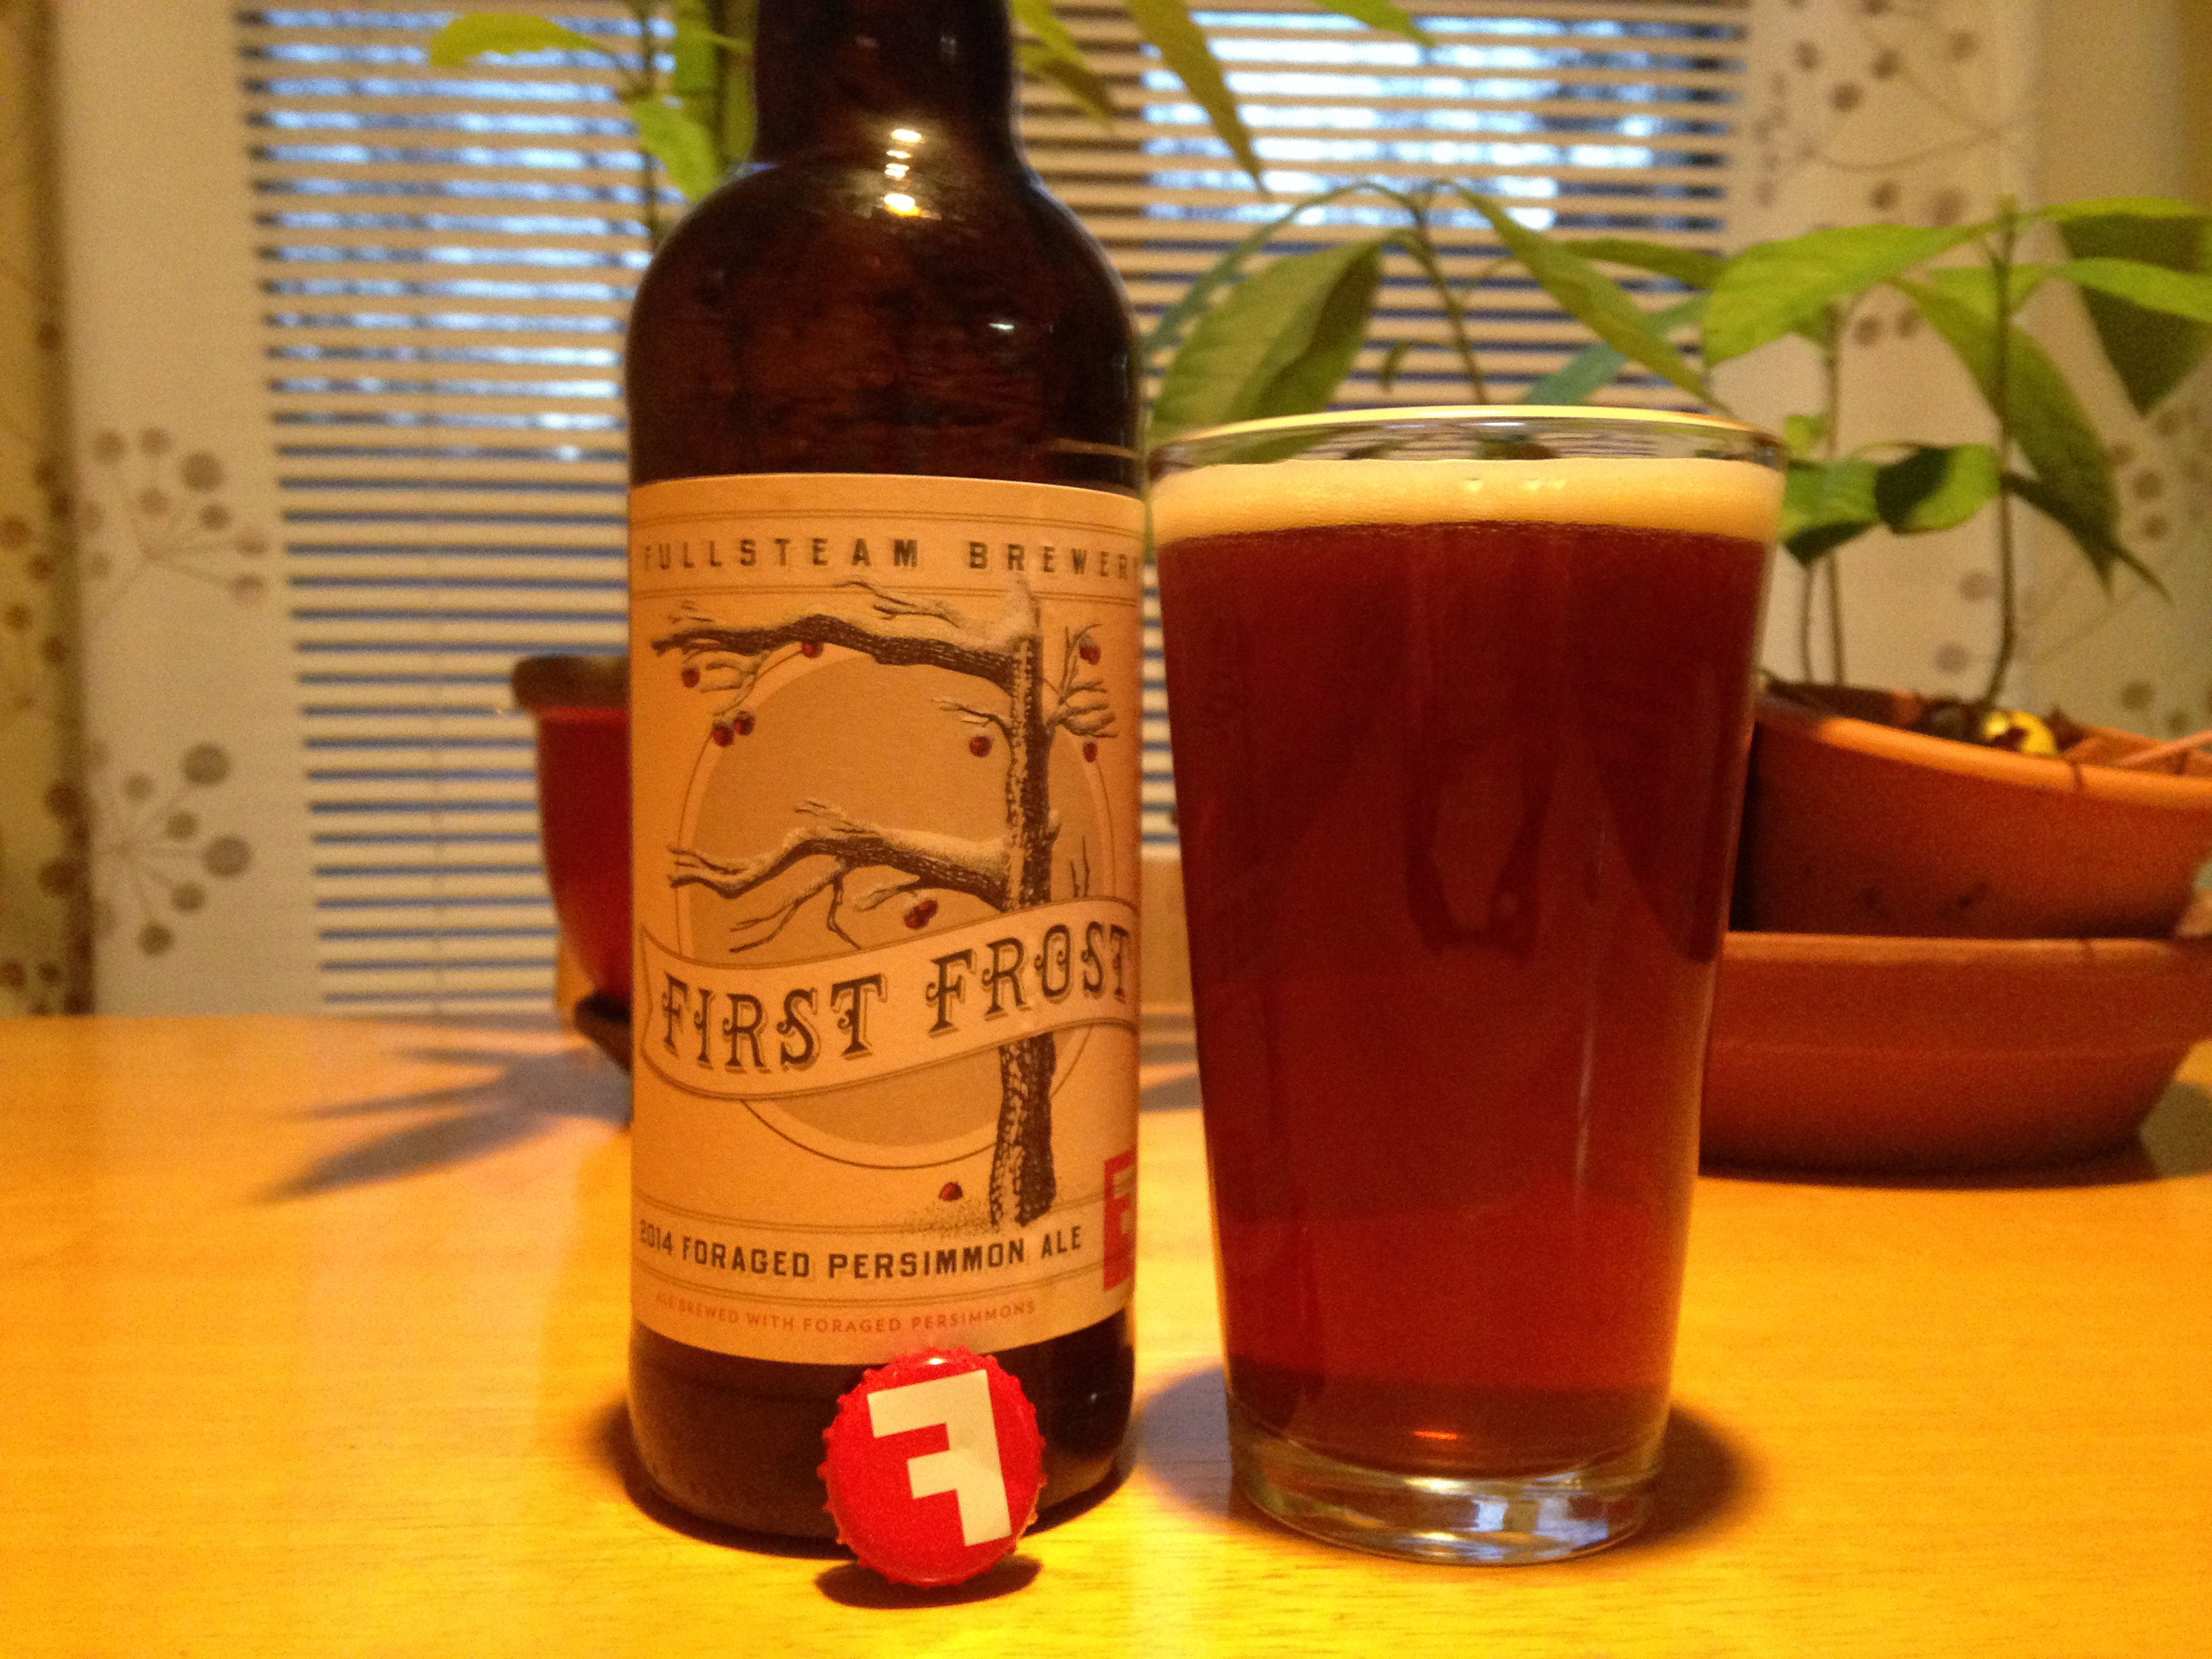 Fullsteam Brewery | First Frost Foraged Persimmon Ale